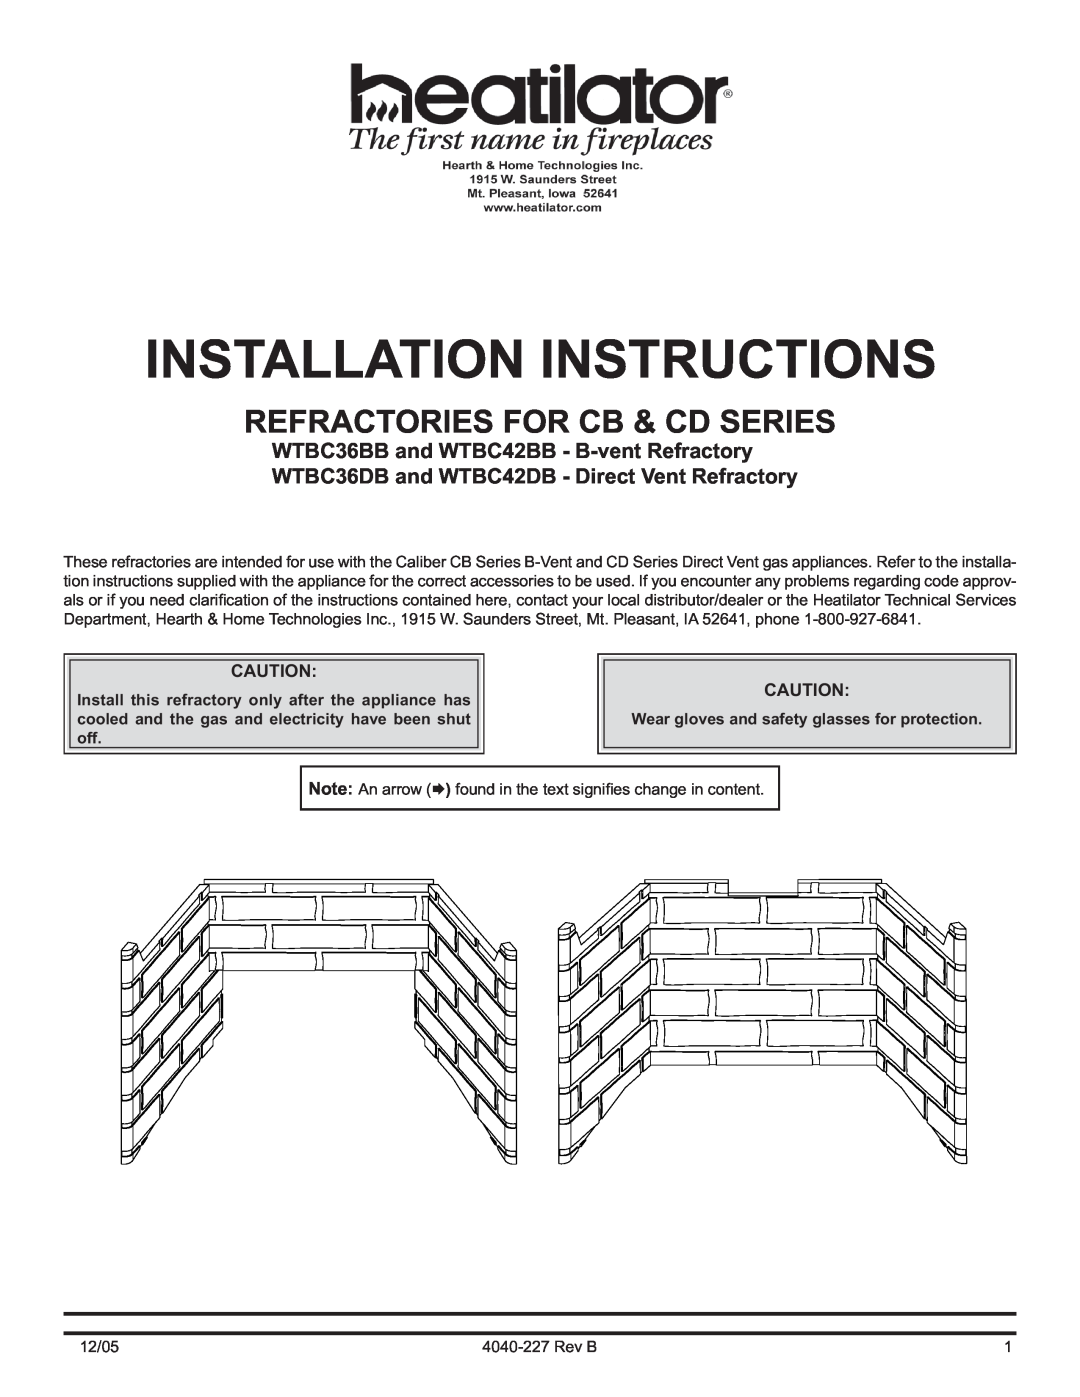 Hearth and Home Technologies WTBC42DB, WTBC36DB installation instructions WTBC36BB and WTBC42BB - B-vent Refractory 